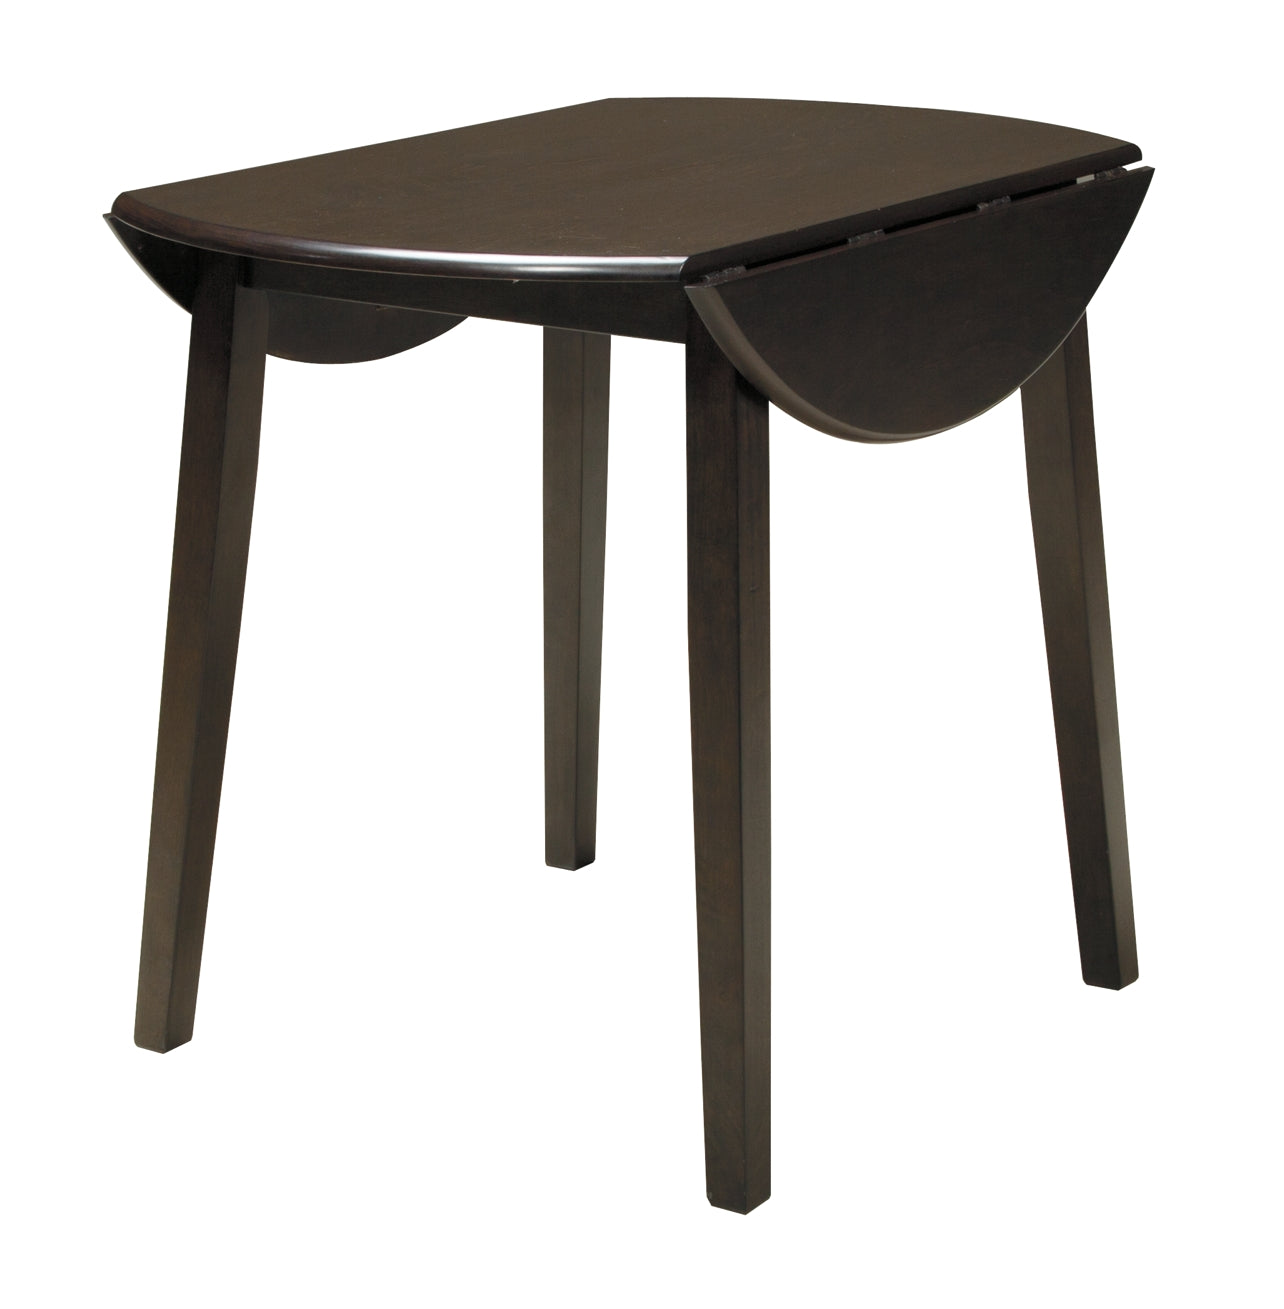 Hammis Round DRM Drop Leaf Table at Walker Mattress and Furniture Locations in Cedar Park and Belton TX.